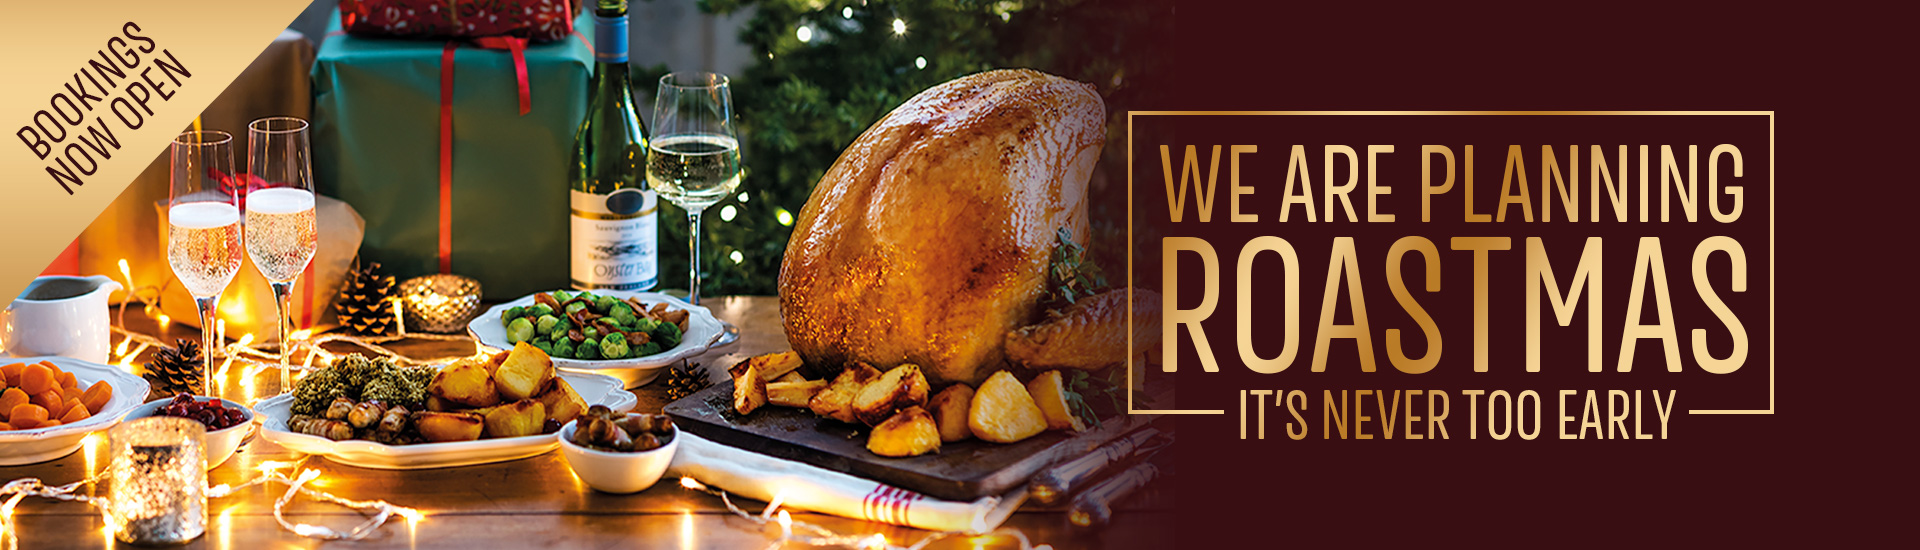 Christmas 2022 at your local Toby Carvery Strathclyde Park | Home of the Roast